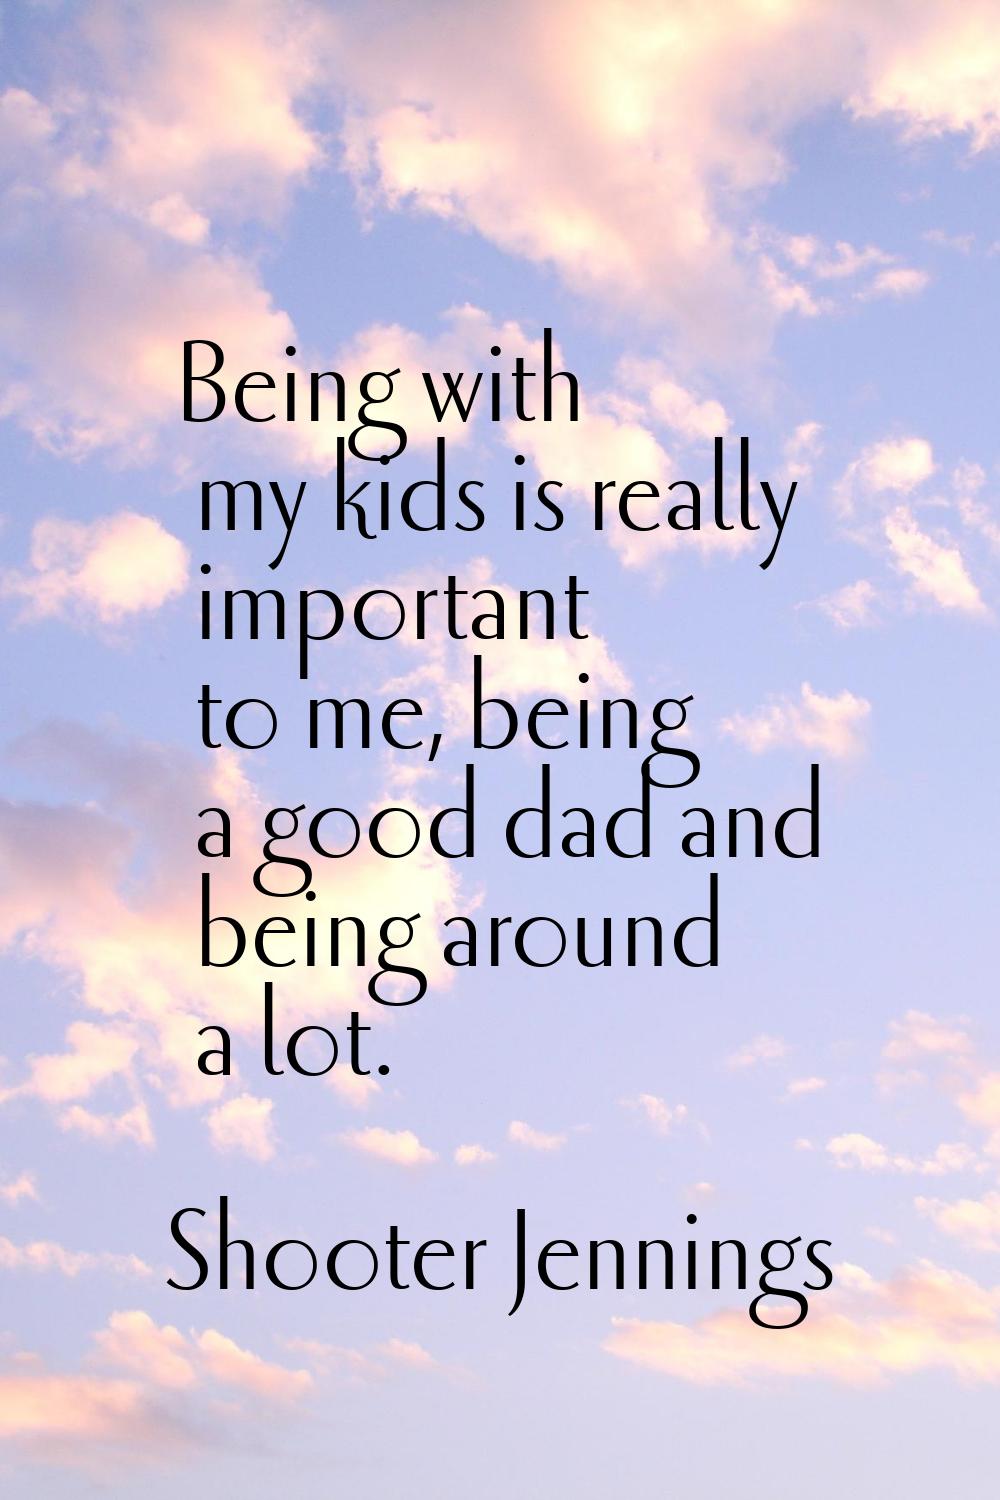 Being with my kids is really important to me, being a good dad and being around a lot.